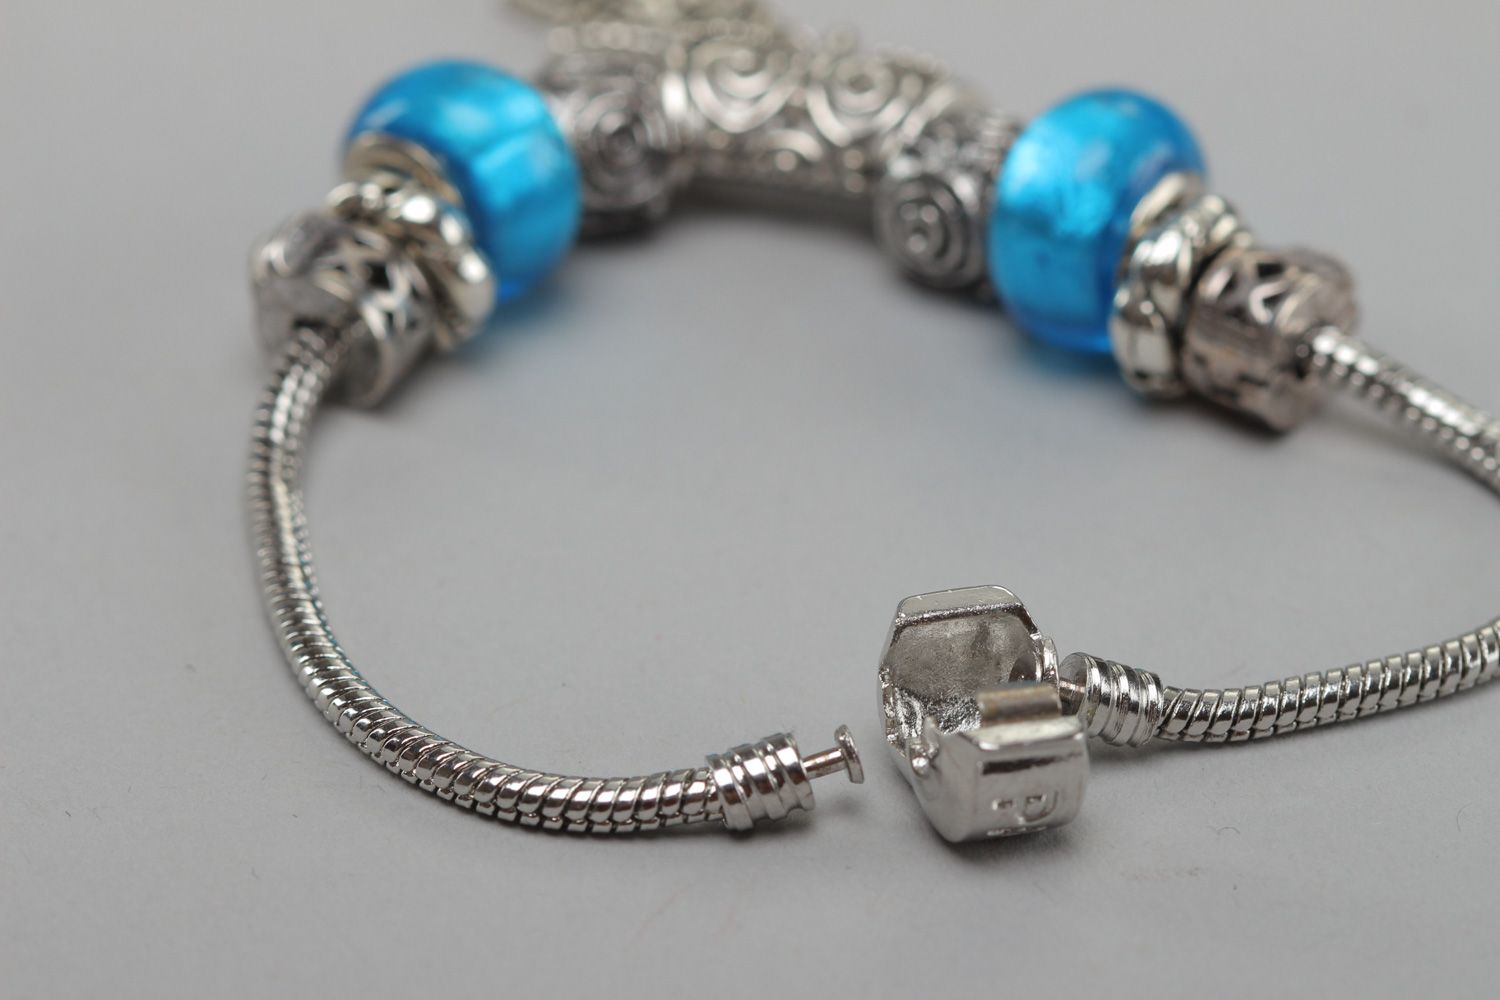 Thin handmade wrist bracelet with blue glass beads and metal charm for women photo 4